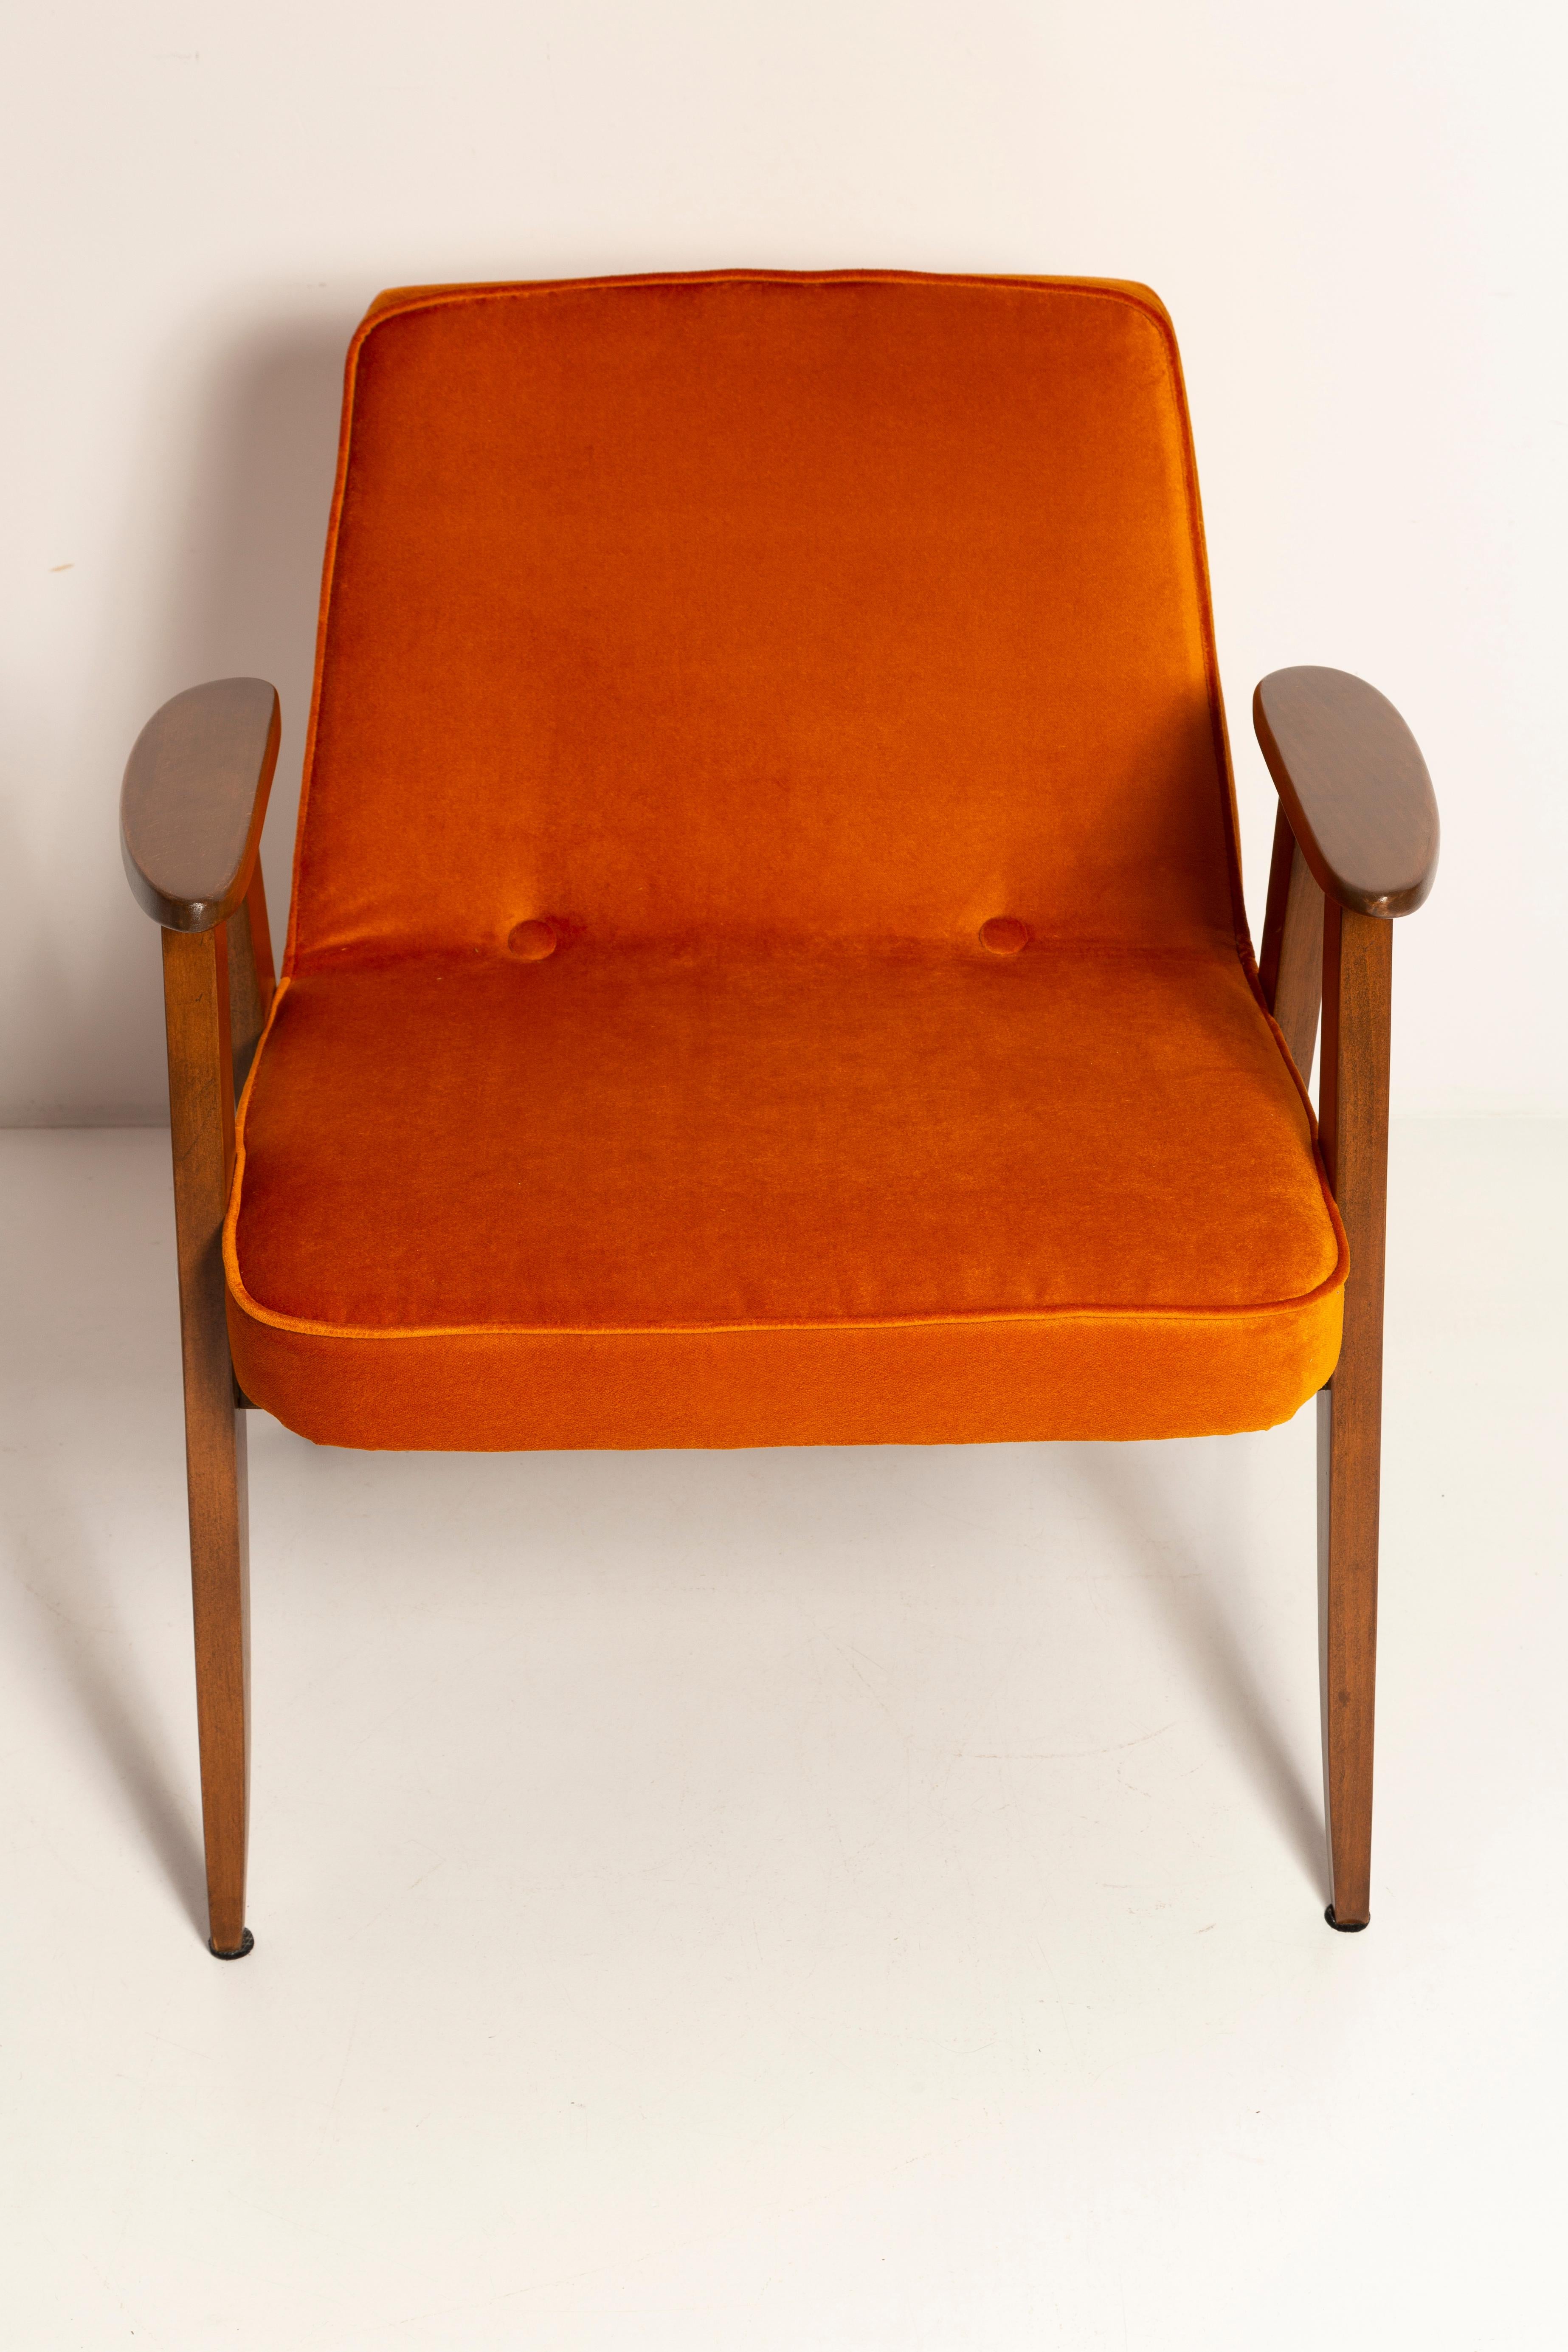 Pair of Mid-Century 366 Armchairs, Green and Orange, by Chierowski Europe, 1960s For Sale 9